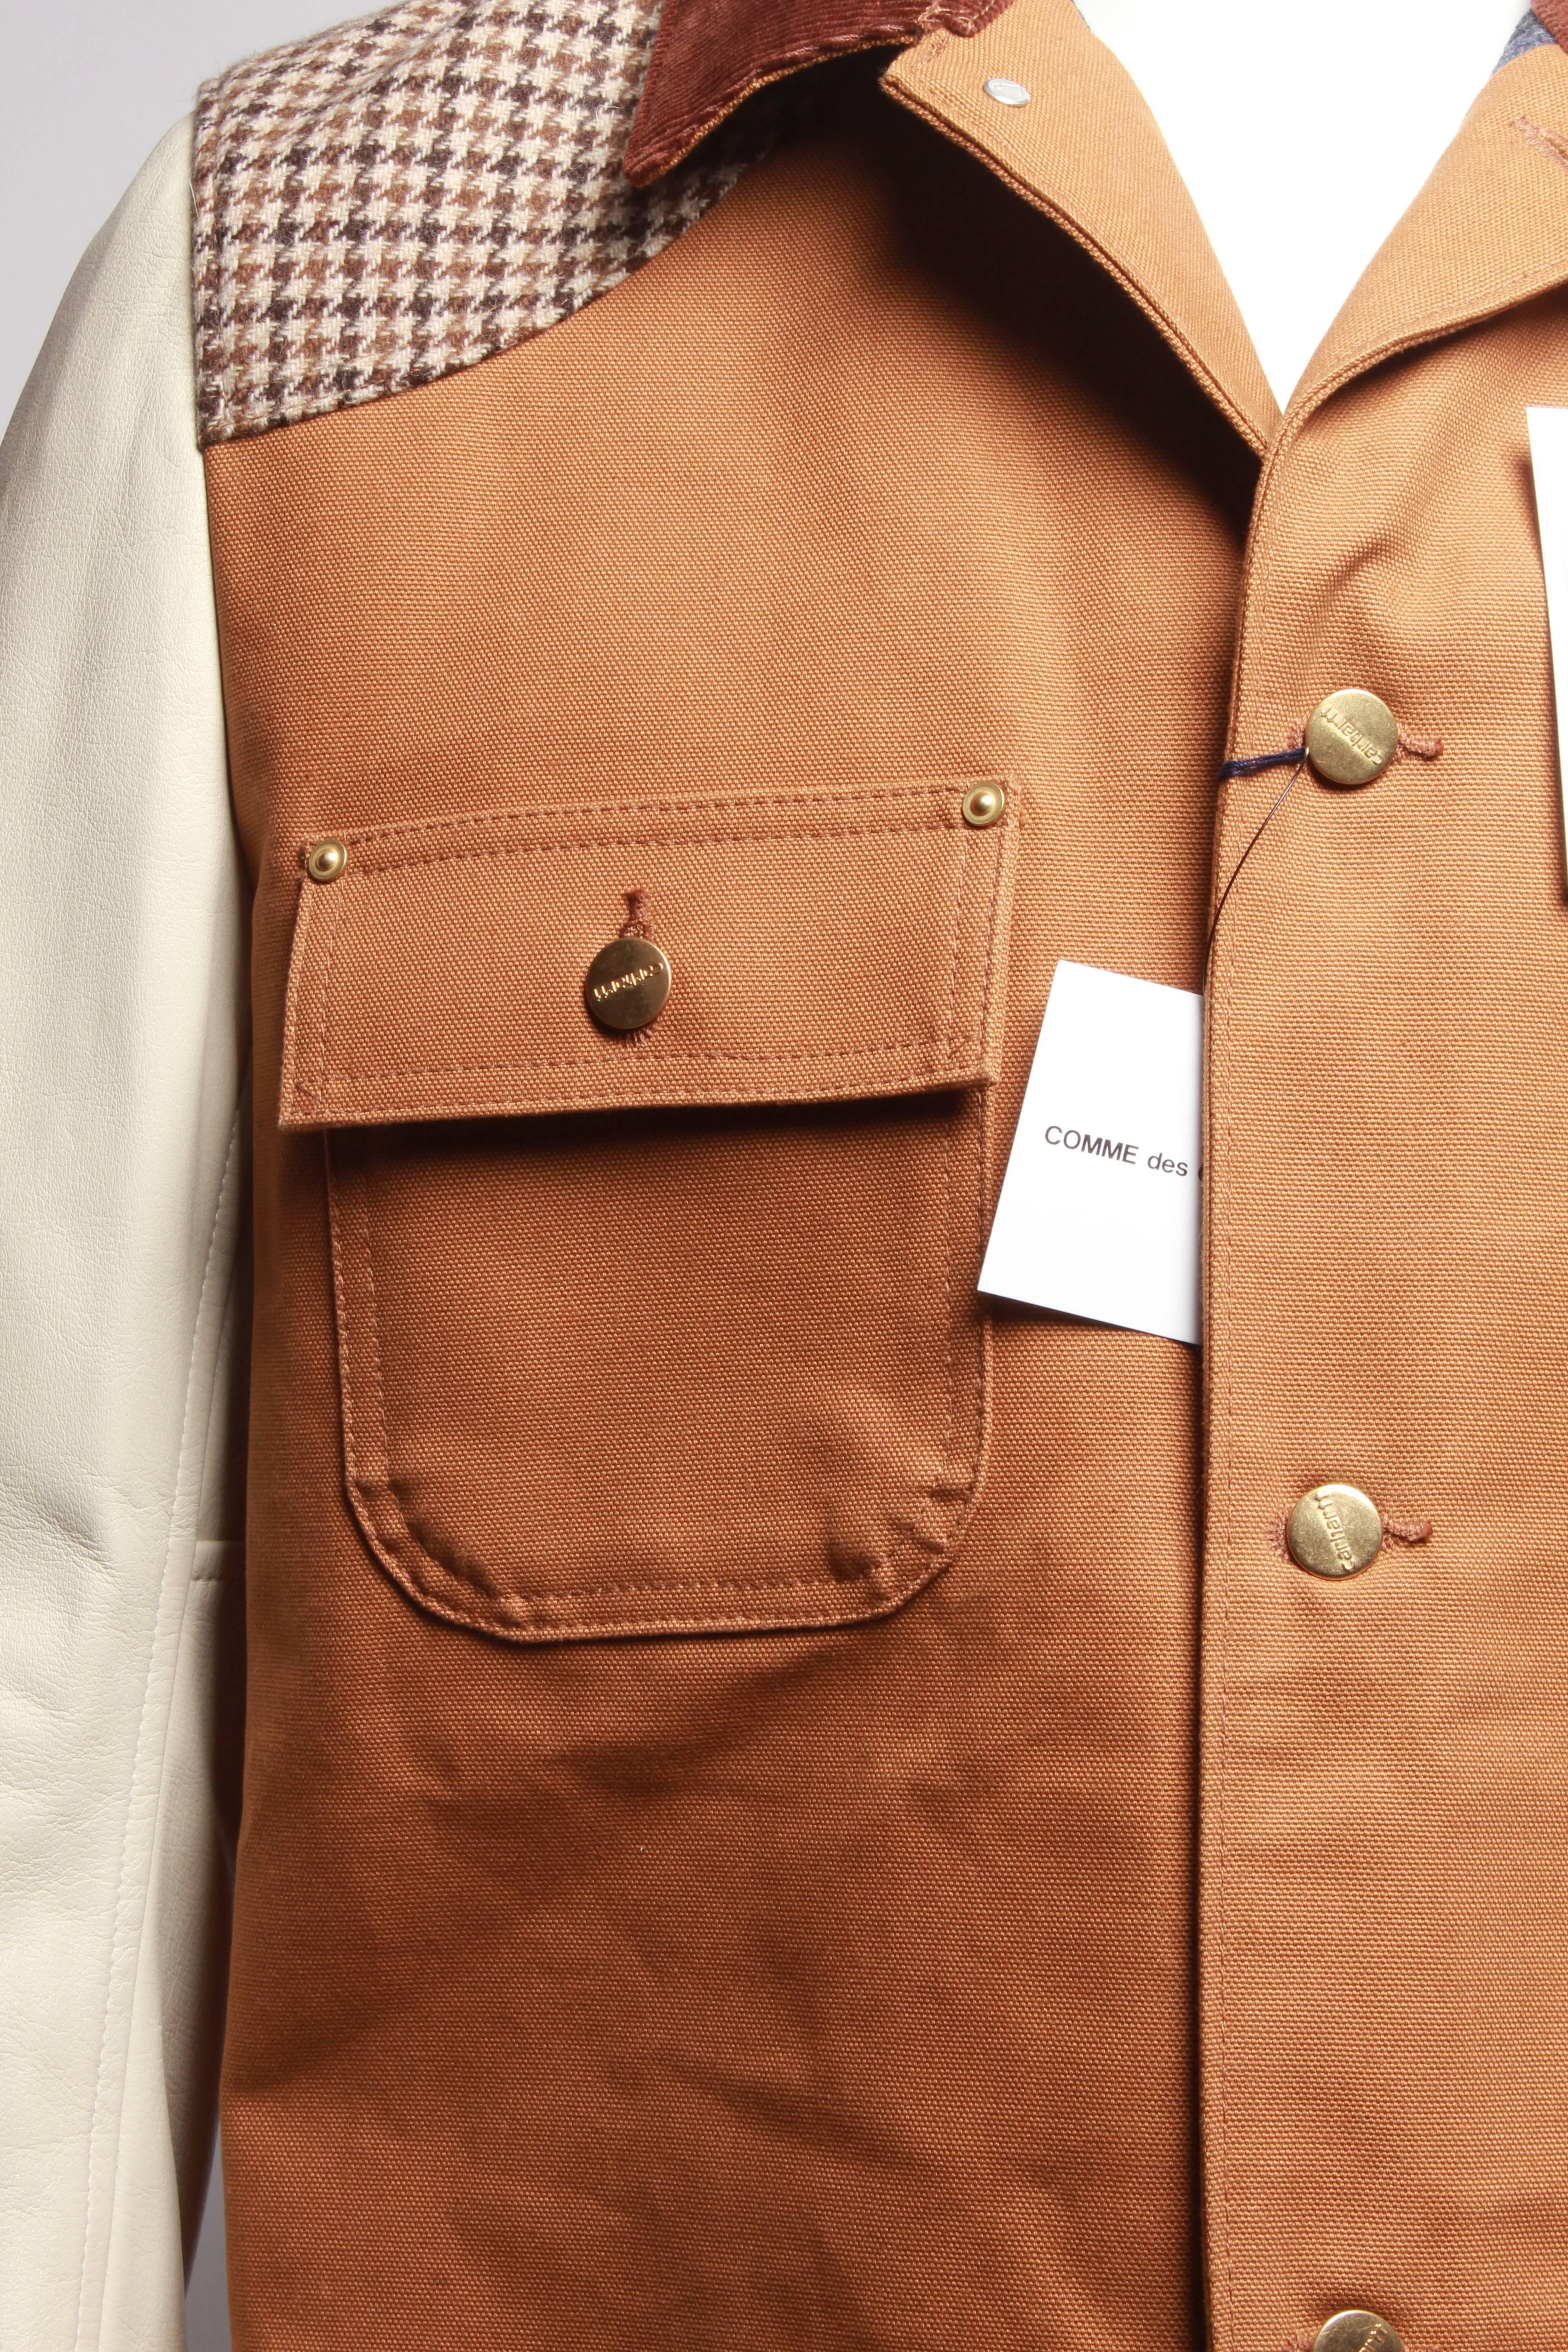 Patchwork chore coat from Junya Watanabe MAN in collaboration with Carhartt in Brown and Off Beige. Spread collar. Full button front closure. Branded buttons. Multiple patch pockets at front. Woven Carhartt patch. Interior pocket with Velcro